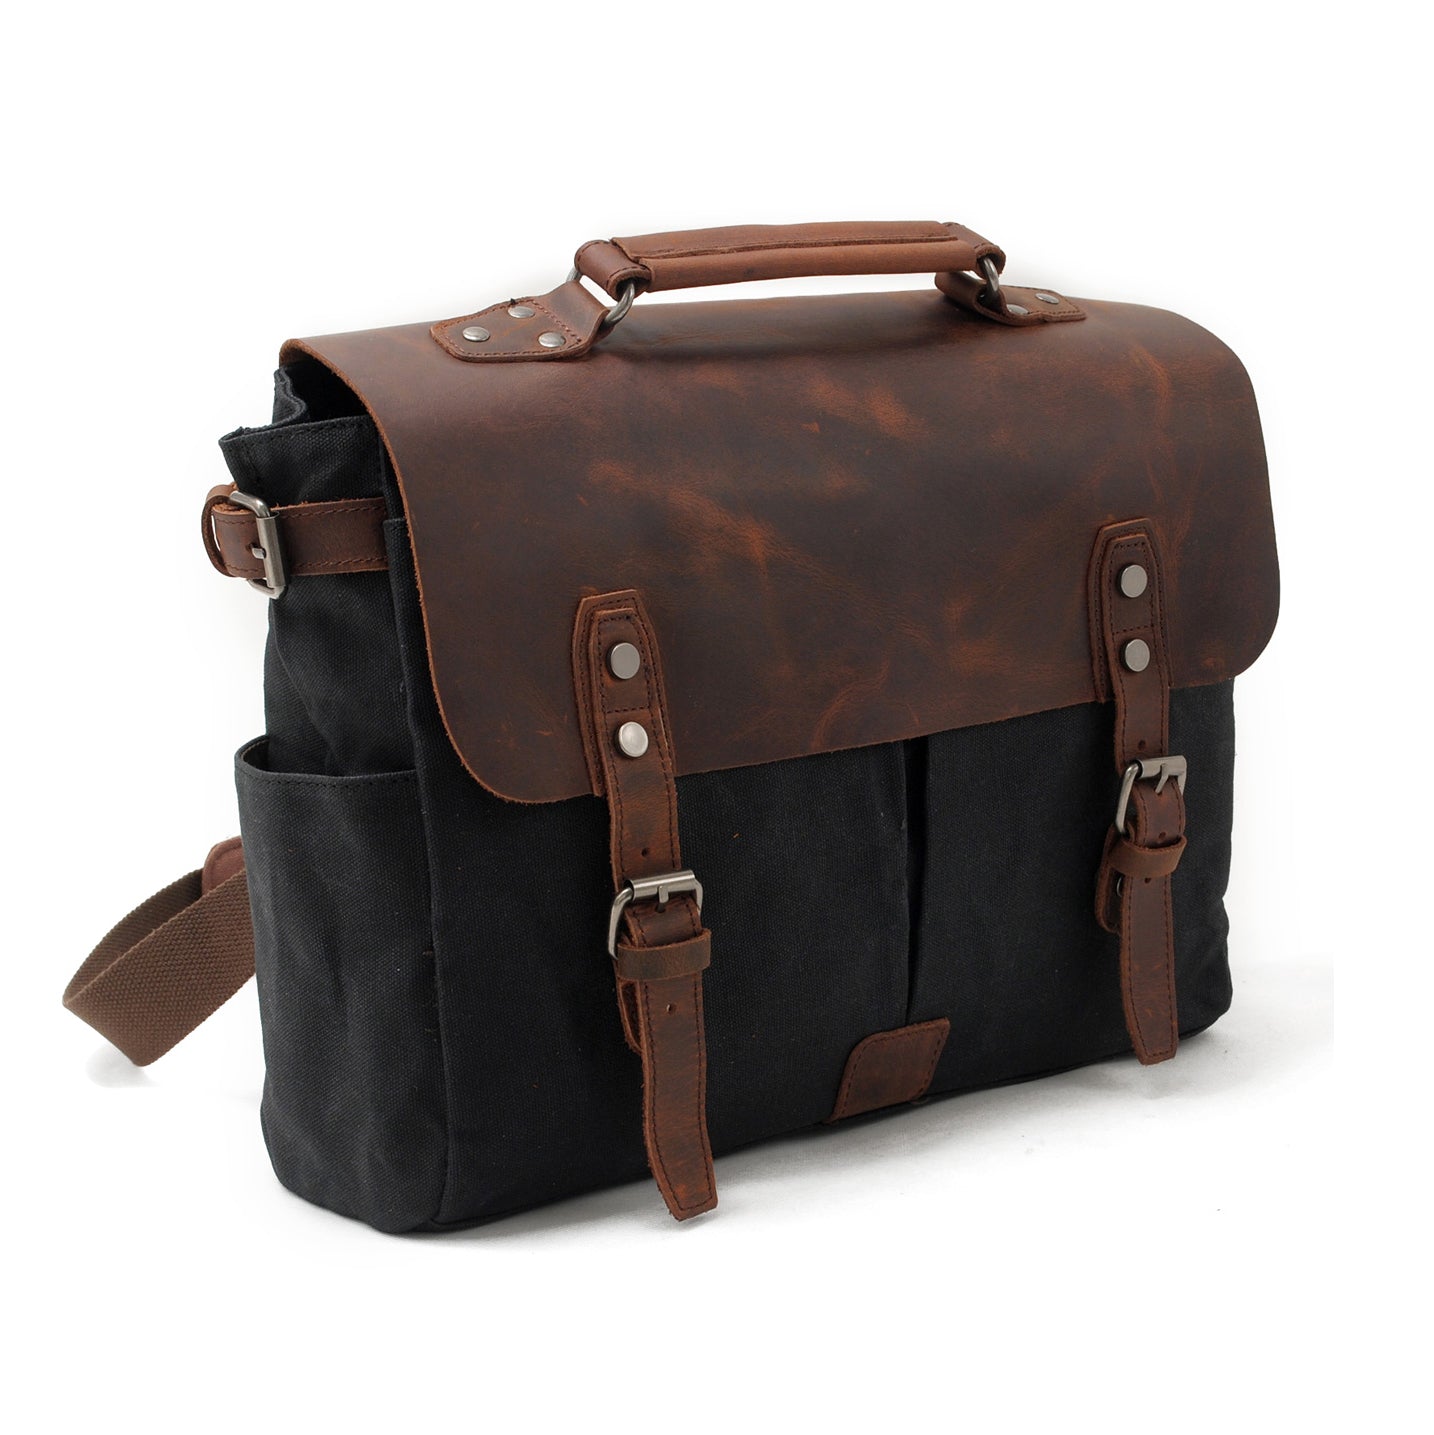 Vintage-Waxed-Canvas-and-Crazy-Horse-Leather-Laptop-Messenger-Bag-Black-i7bags-2